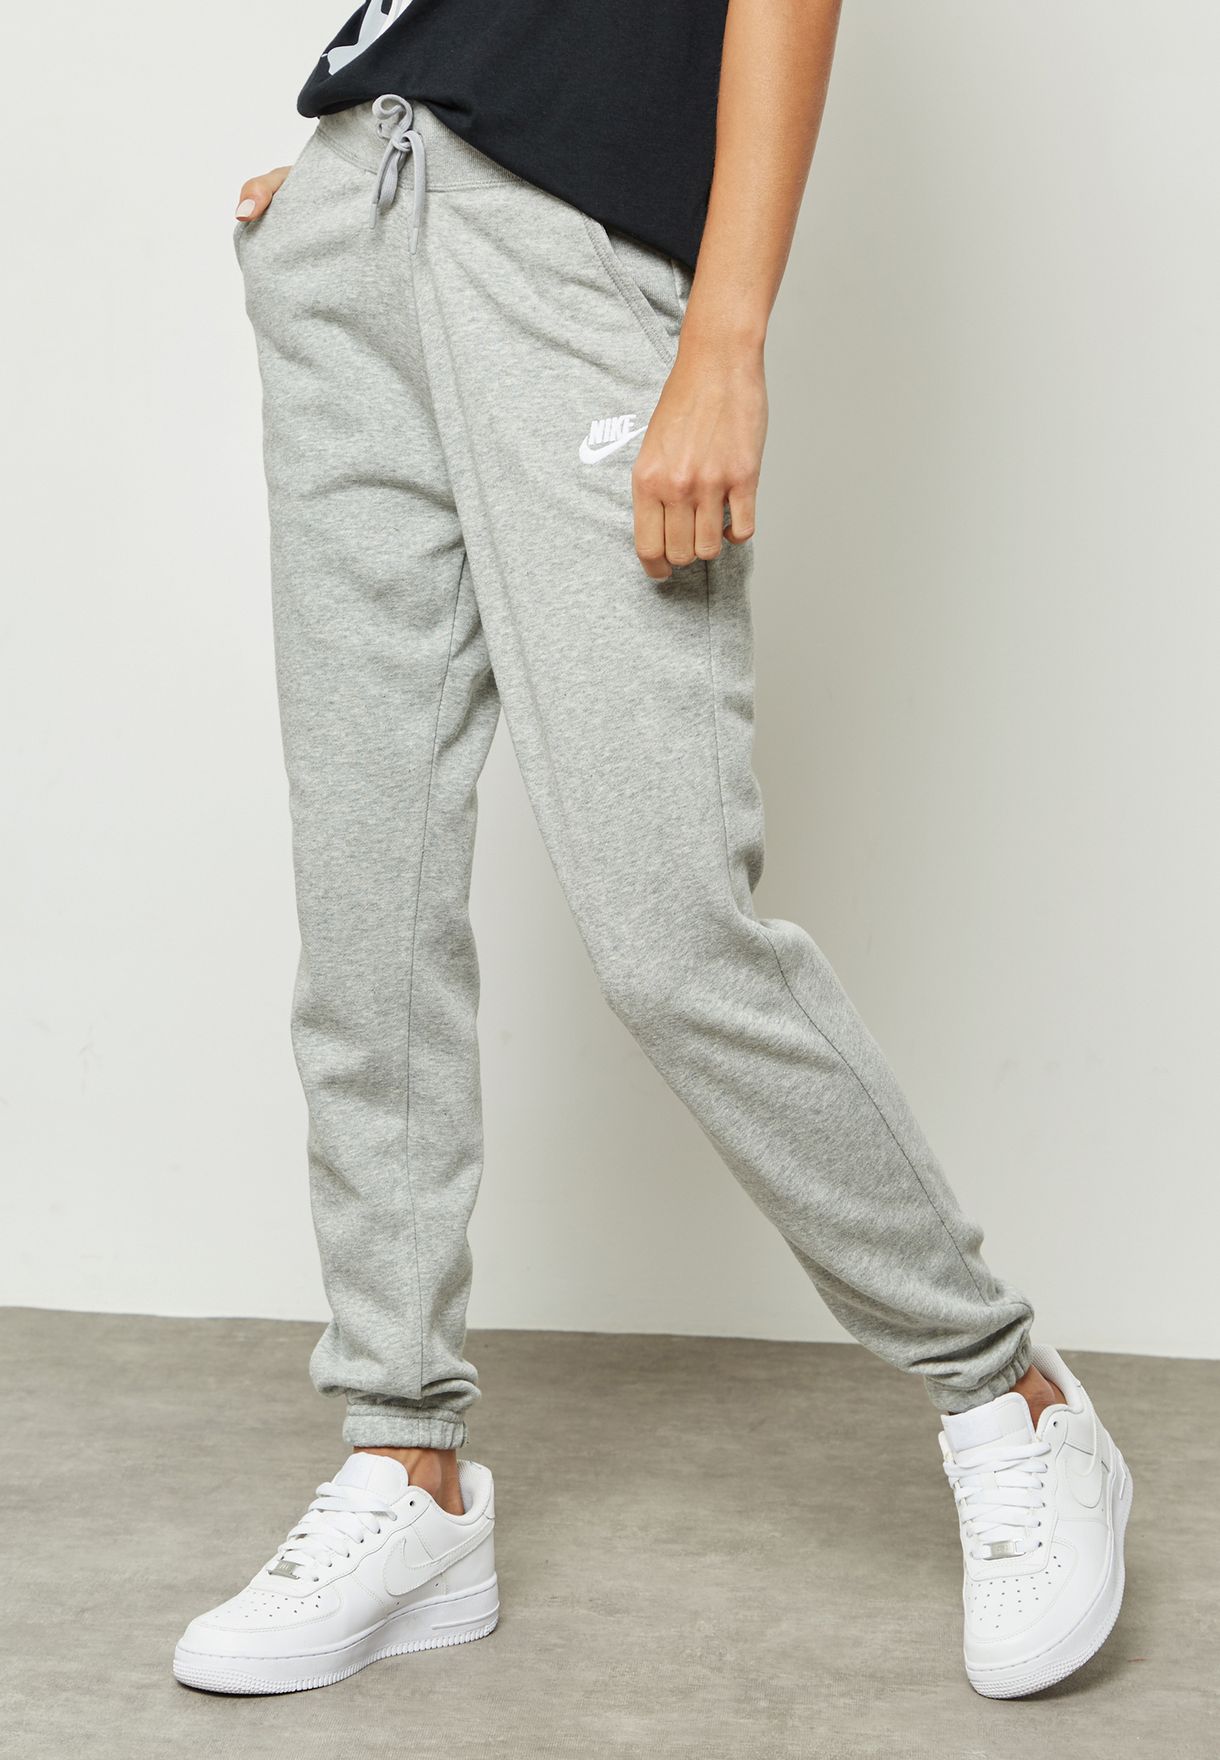 nike fitted sweatpants